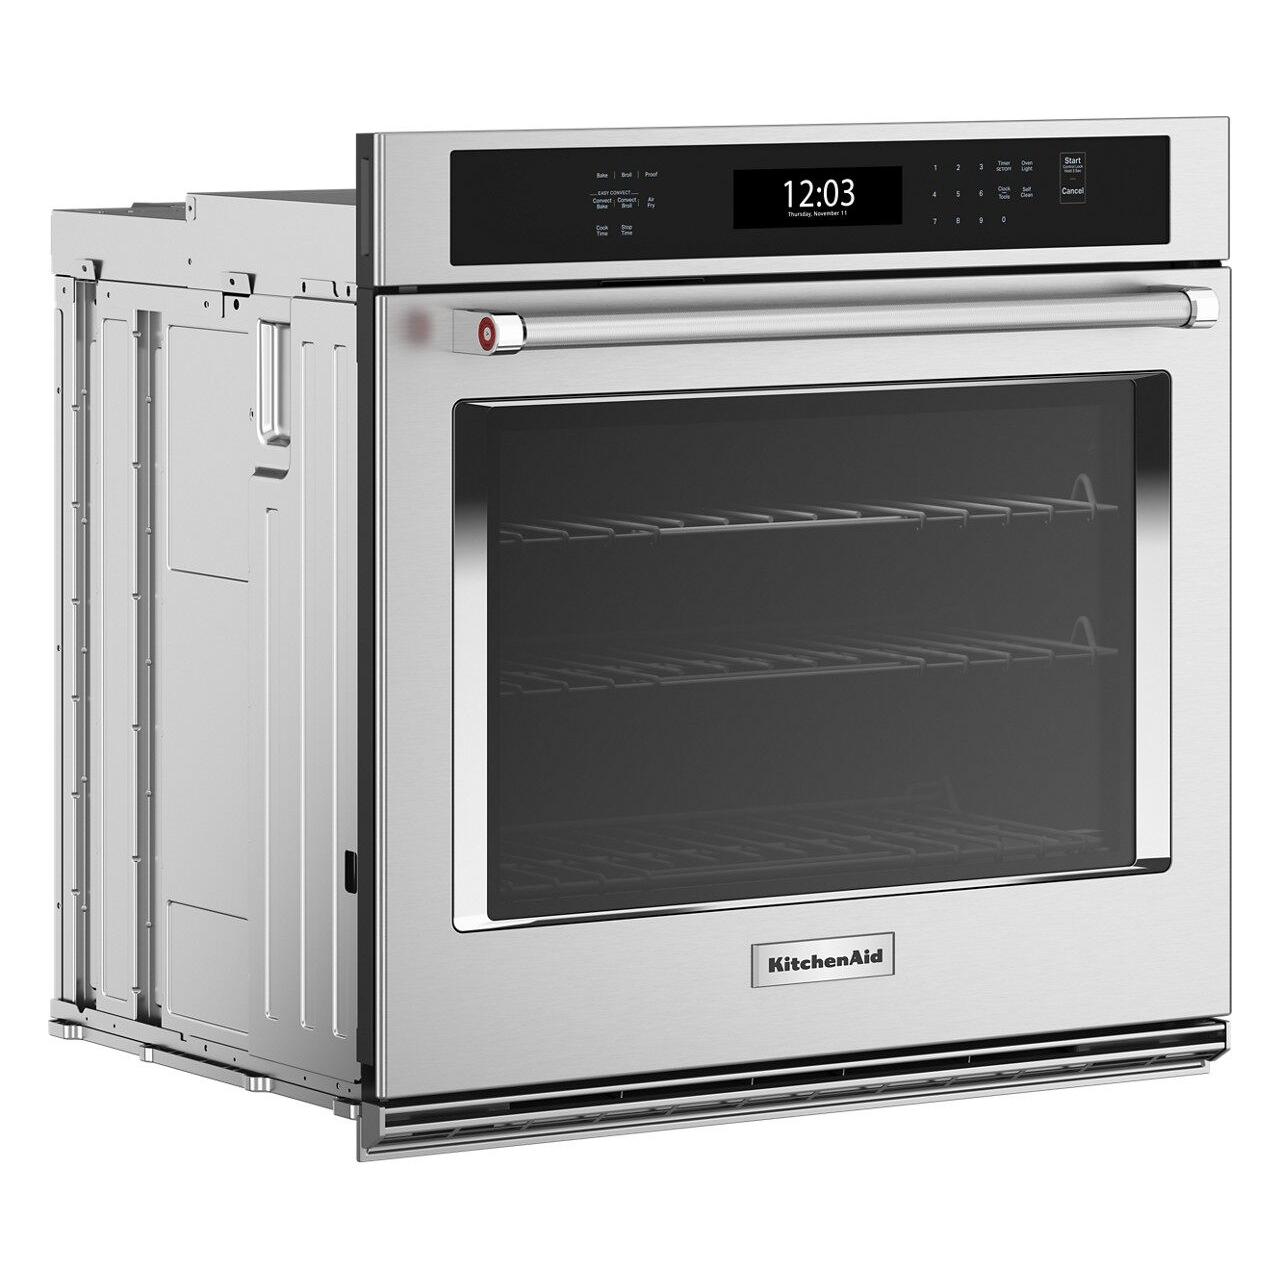 KitchenAid 30-inch, 5.0 cu. ft. Built-in Wall Oven with Air Fry KOES530PSS